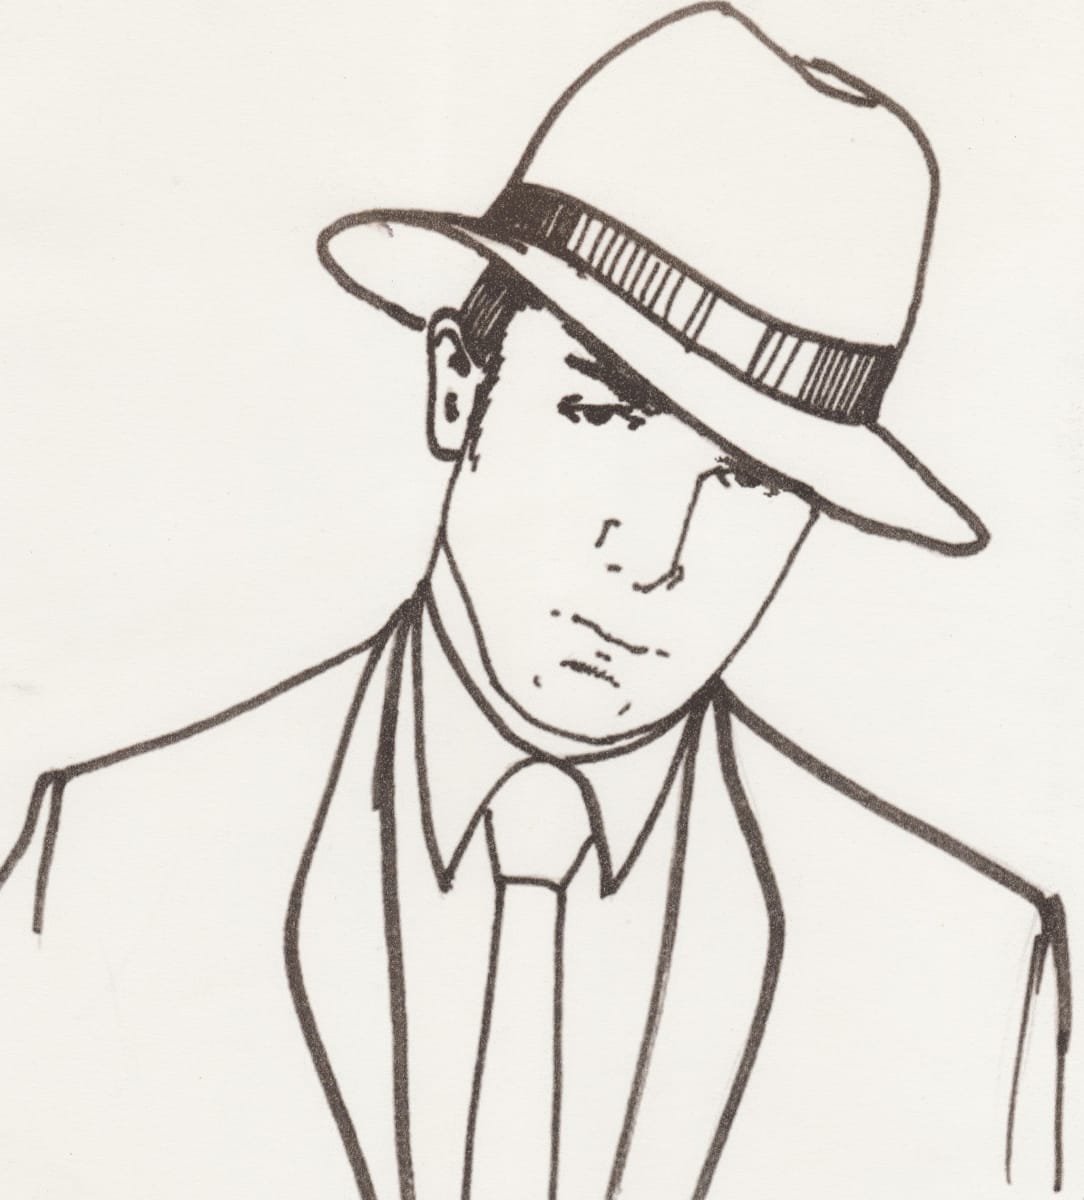 Gangster CD Cover by Elizabeth Stathis   Image: Pen and Ink rendering of a young gangster for a CD album cover.